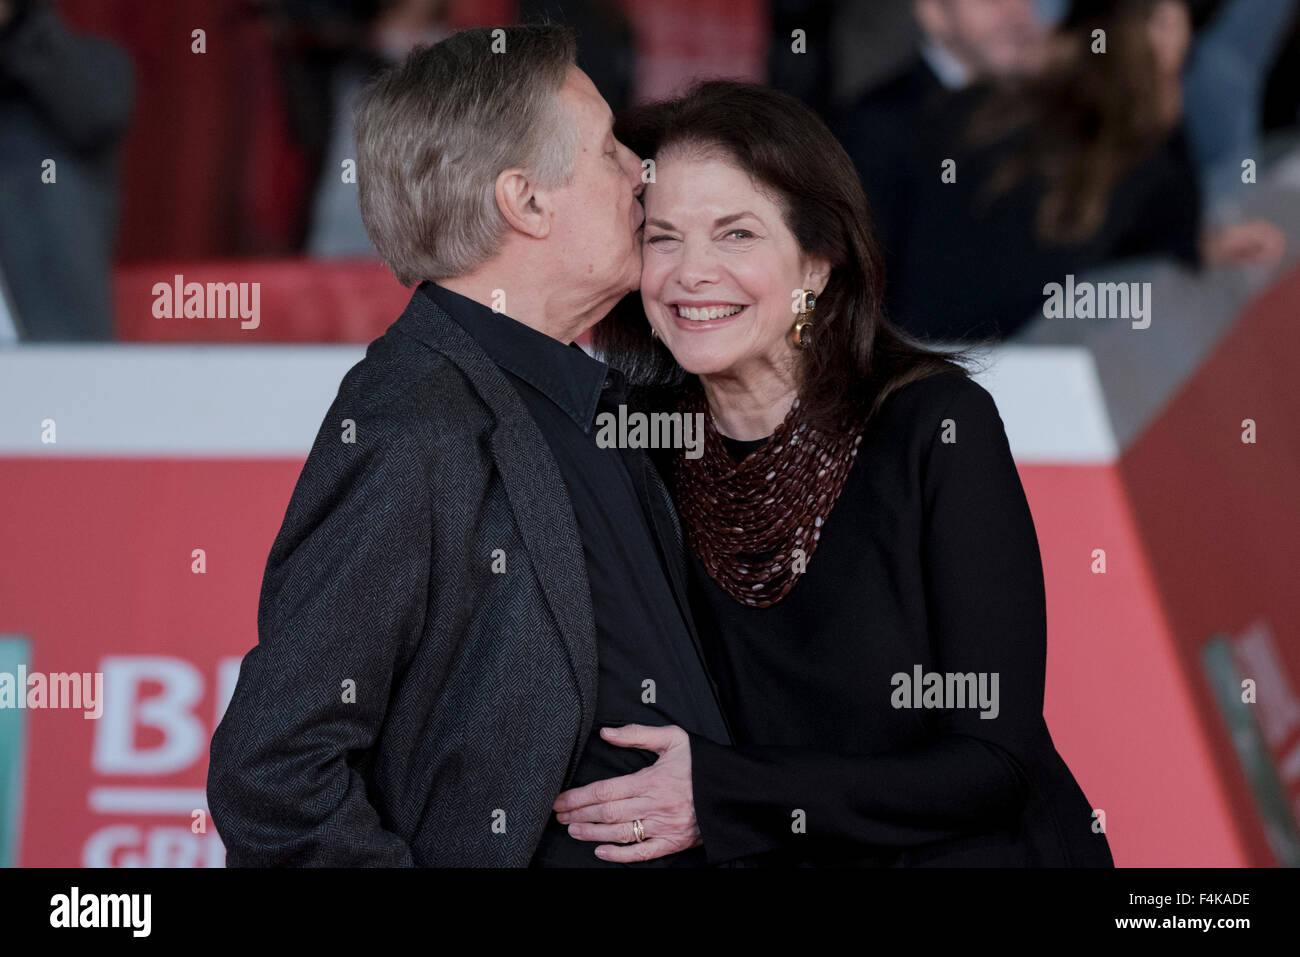 Rome, Italy. 19th Oct, 2015. director Laurent Laffargue, actors Eric Cantona and Sergi Lopez and guests William Friedkin an wife attending the red carpet for the film 'Les Rois du monde' at 10th Rome Film Festival Pictured: William Friedkin, Sherry Lansing. Credit:  Massimo Valicchia/Alamy Live News Stock Photo